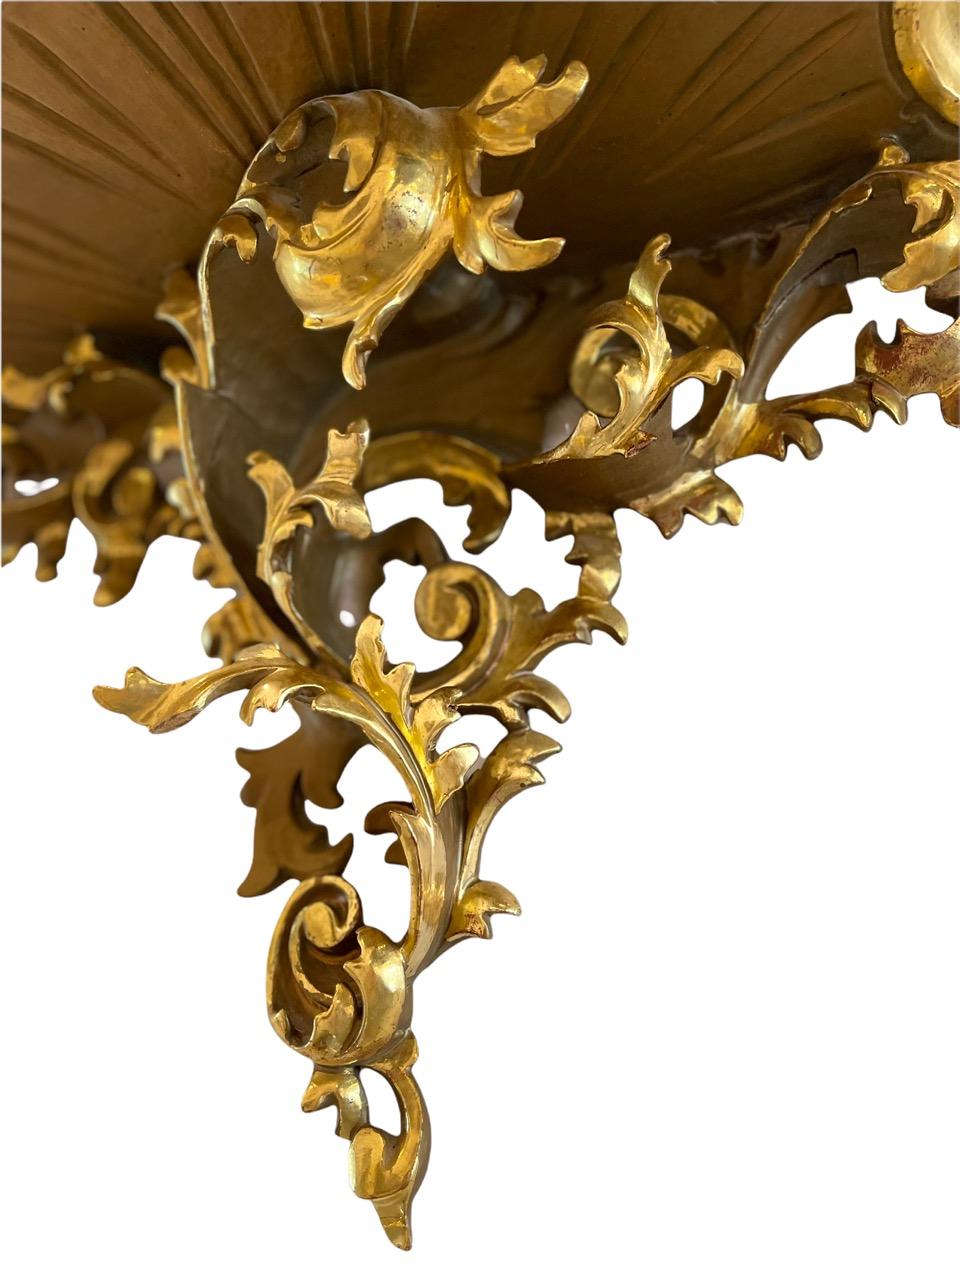 A pair of 18th Century Venetian Rococo carved wood and gold gilded wall shelves. These are finely carved from wood and have a delicate curled scroll design.
 